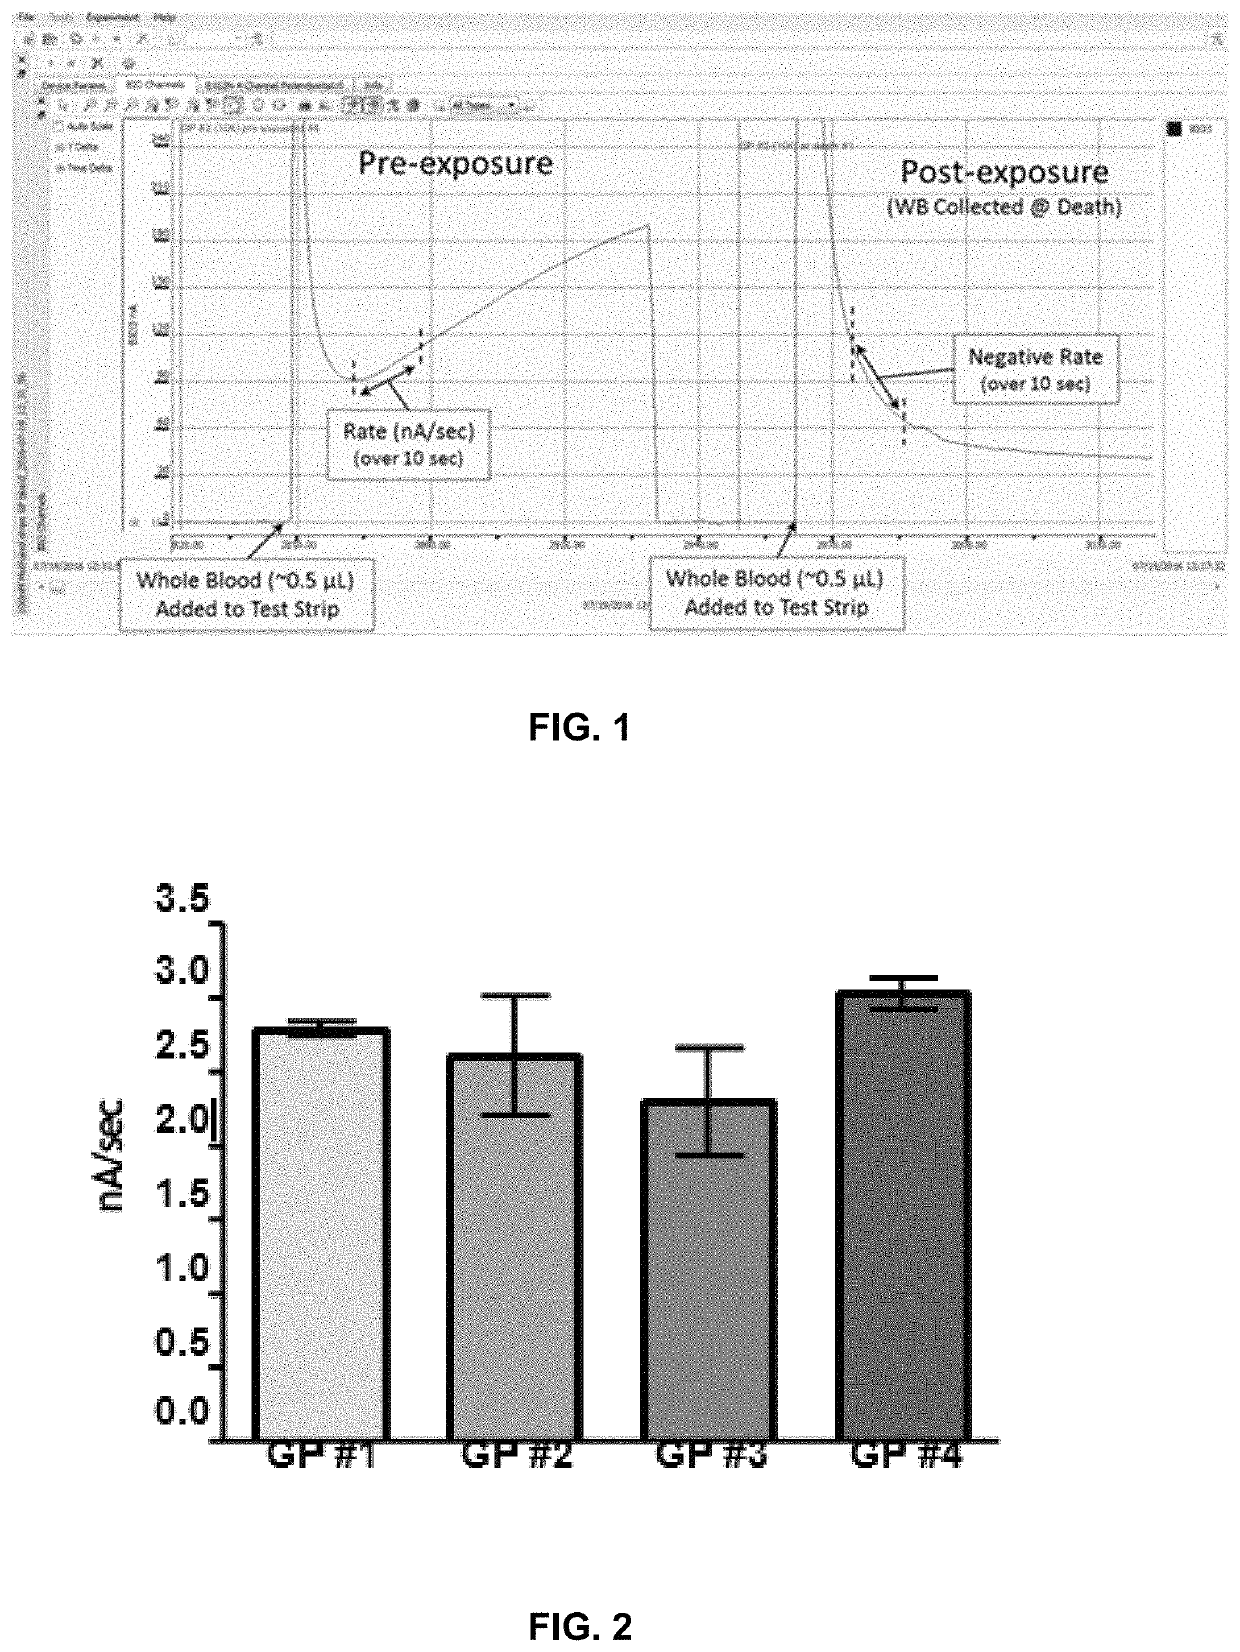 Point-of-care in-vitro diagnostic device for the amperometric detection of cholinesterase activity in whole blood for indication of exposure to cholinesterase inhibiting substances